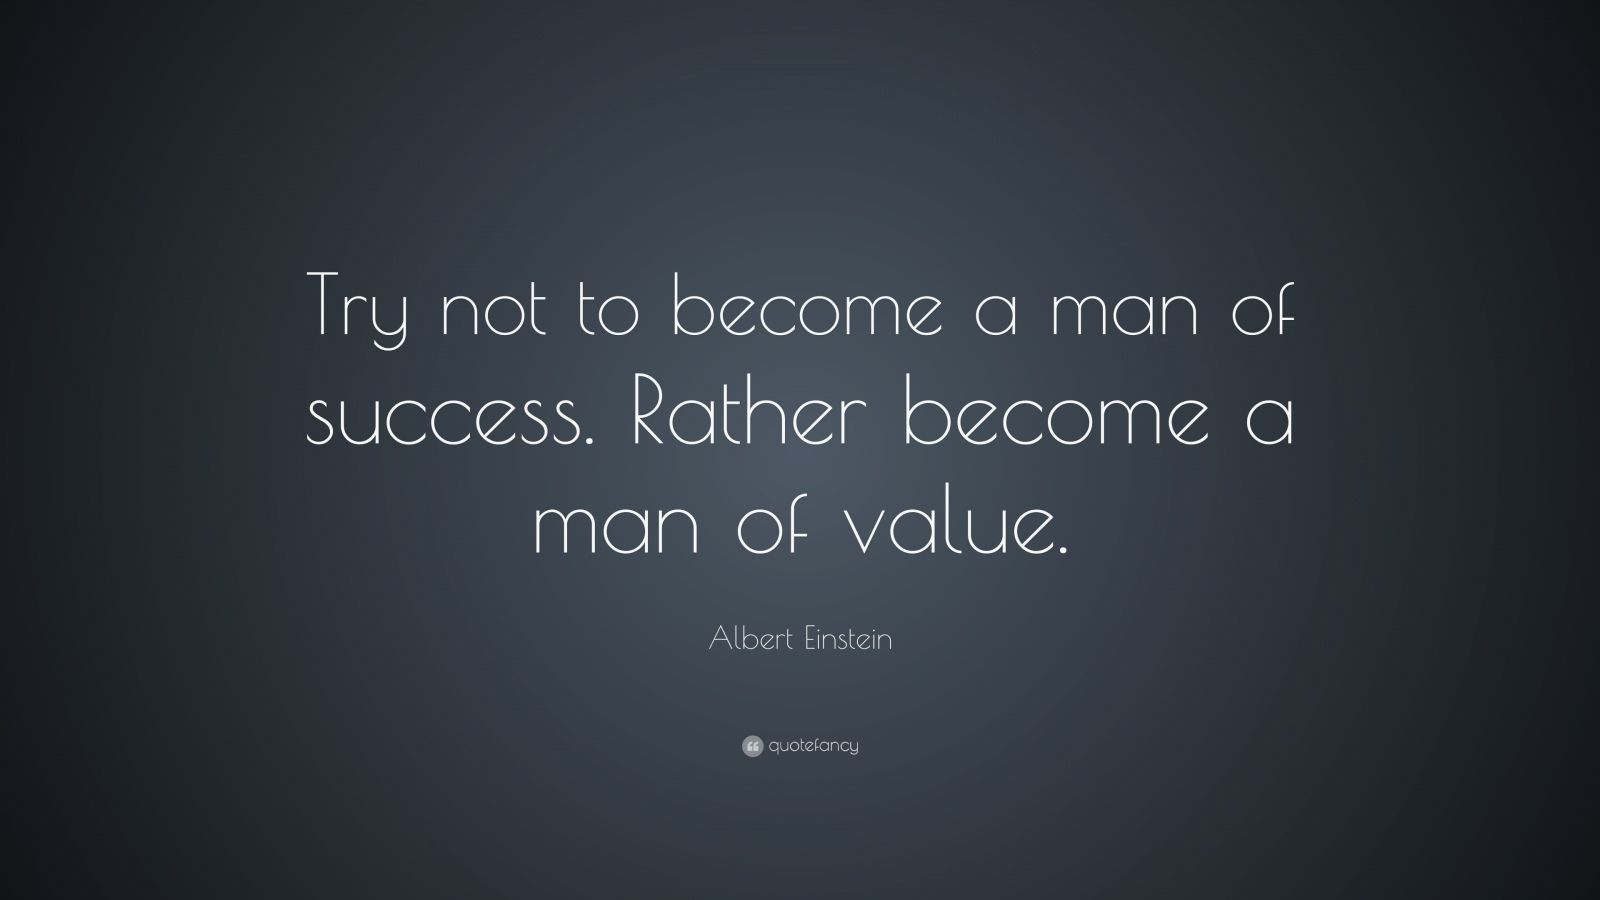 Albert Einstein Quote: “Try not to become a man of success. Rather become a man of value.” (28 wallpaper)